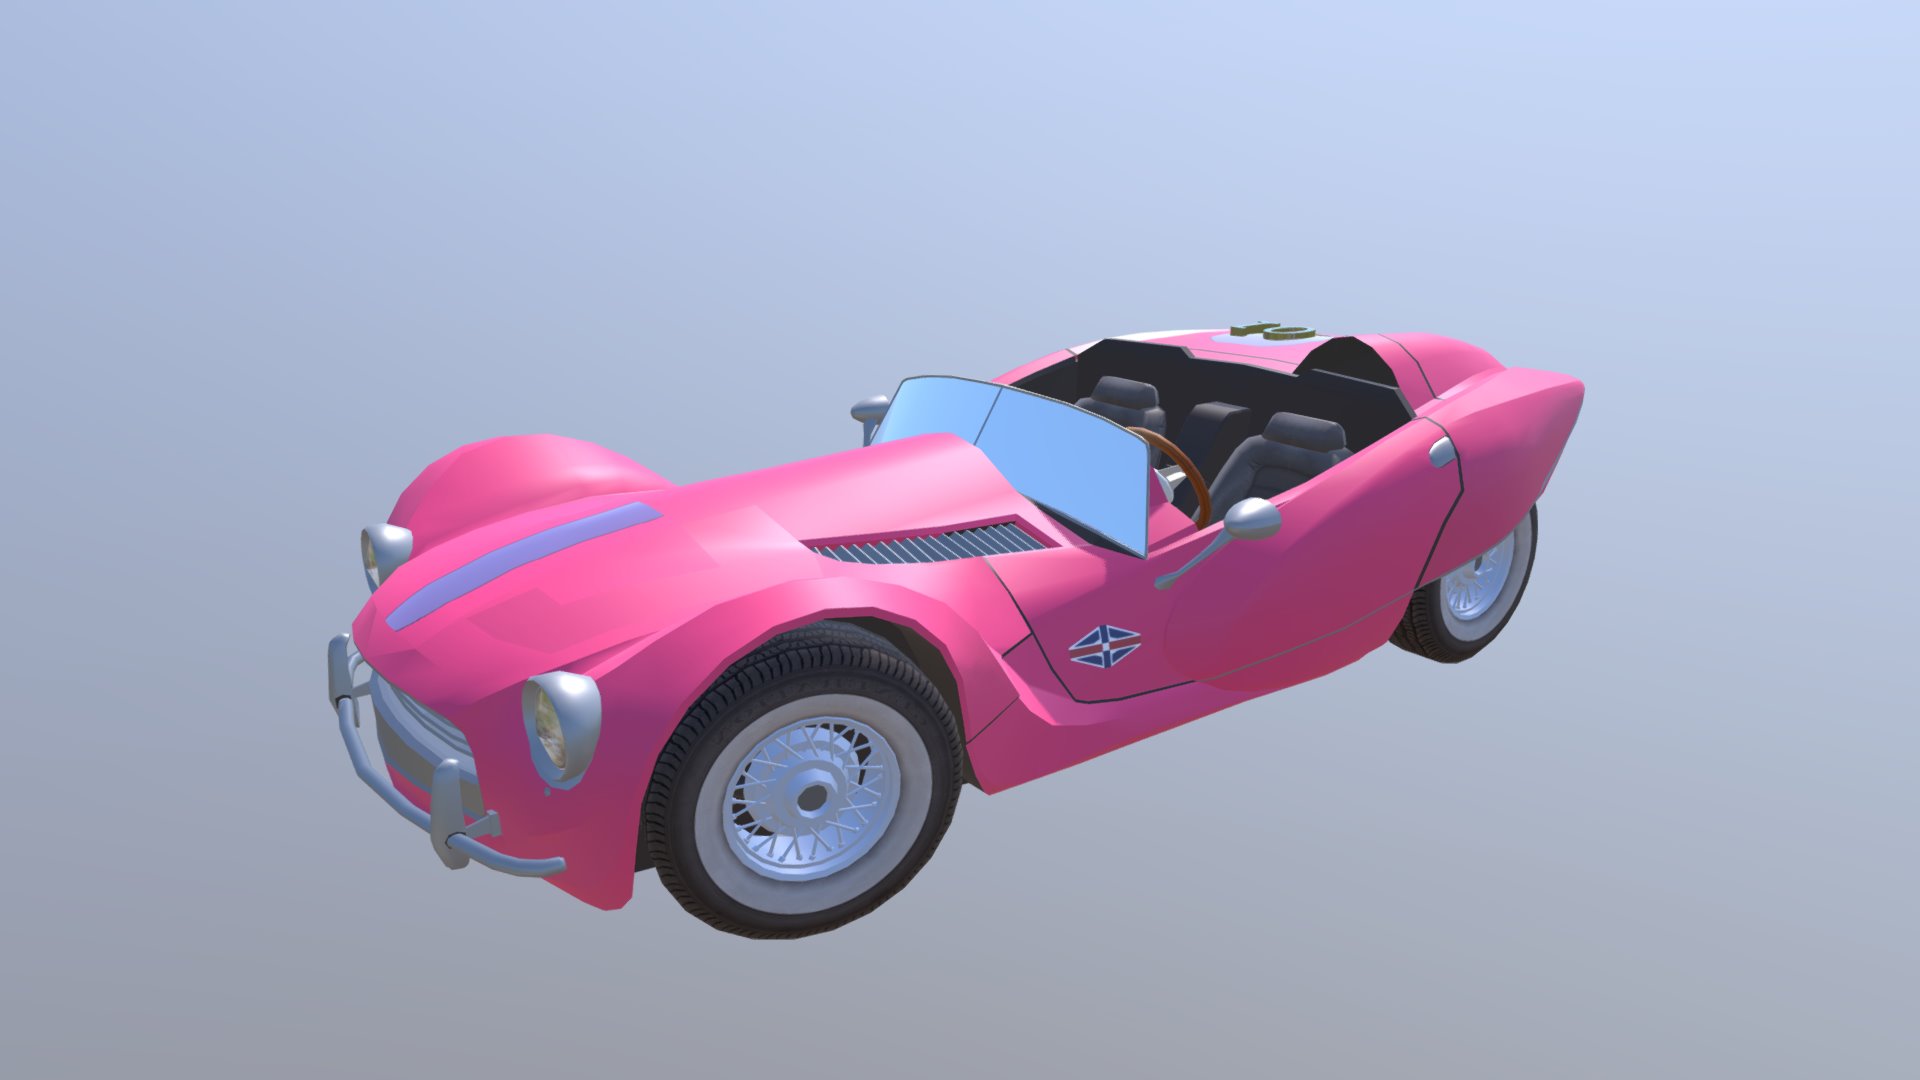 A pink car meant for simple racing. Vroom Vroom!
You can add things to it, use it for a placeholder, or print it as a toy!

PLEASE ENJOY THIS CAR :) - Justice Track Car - 3D model by HardzGal 3d model